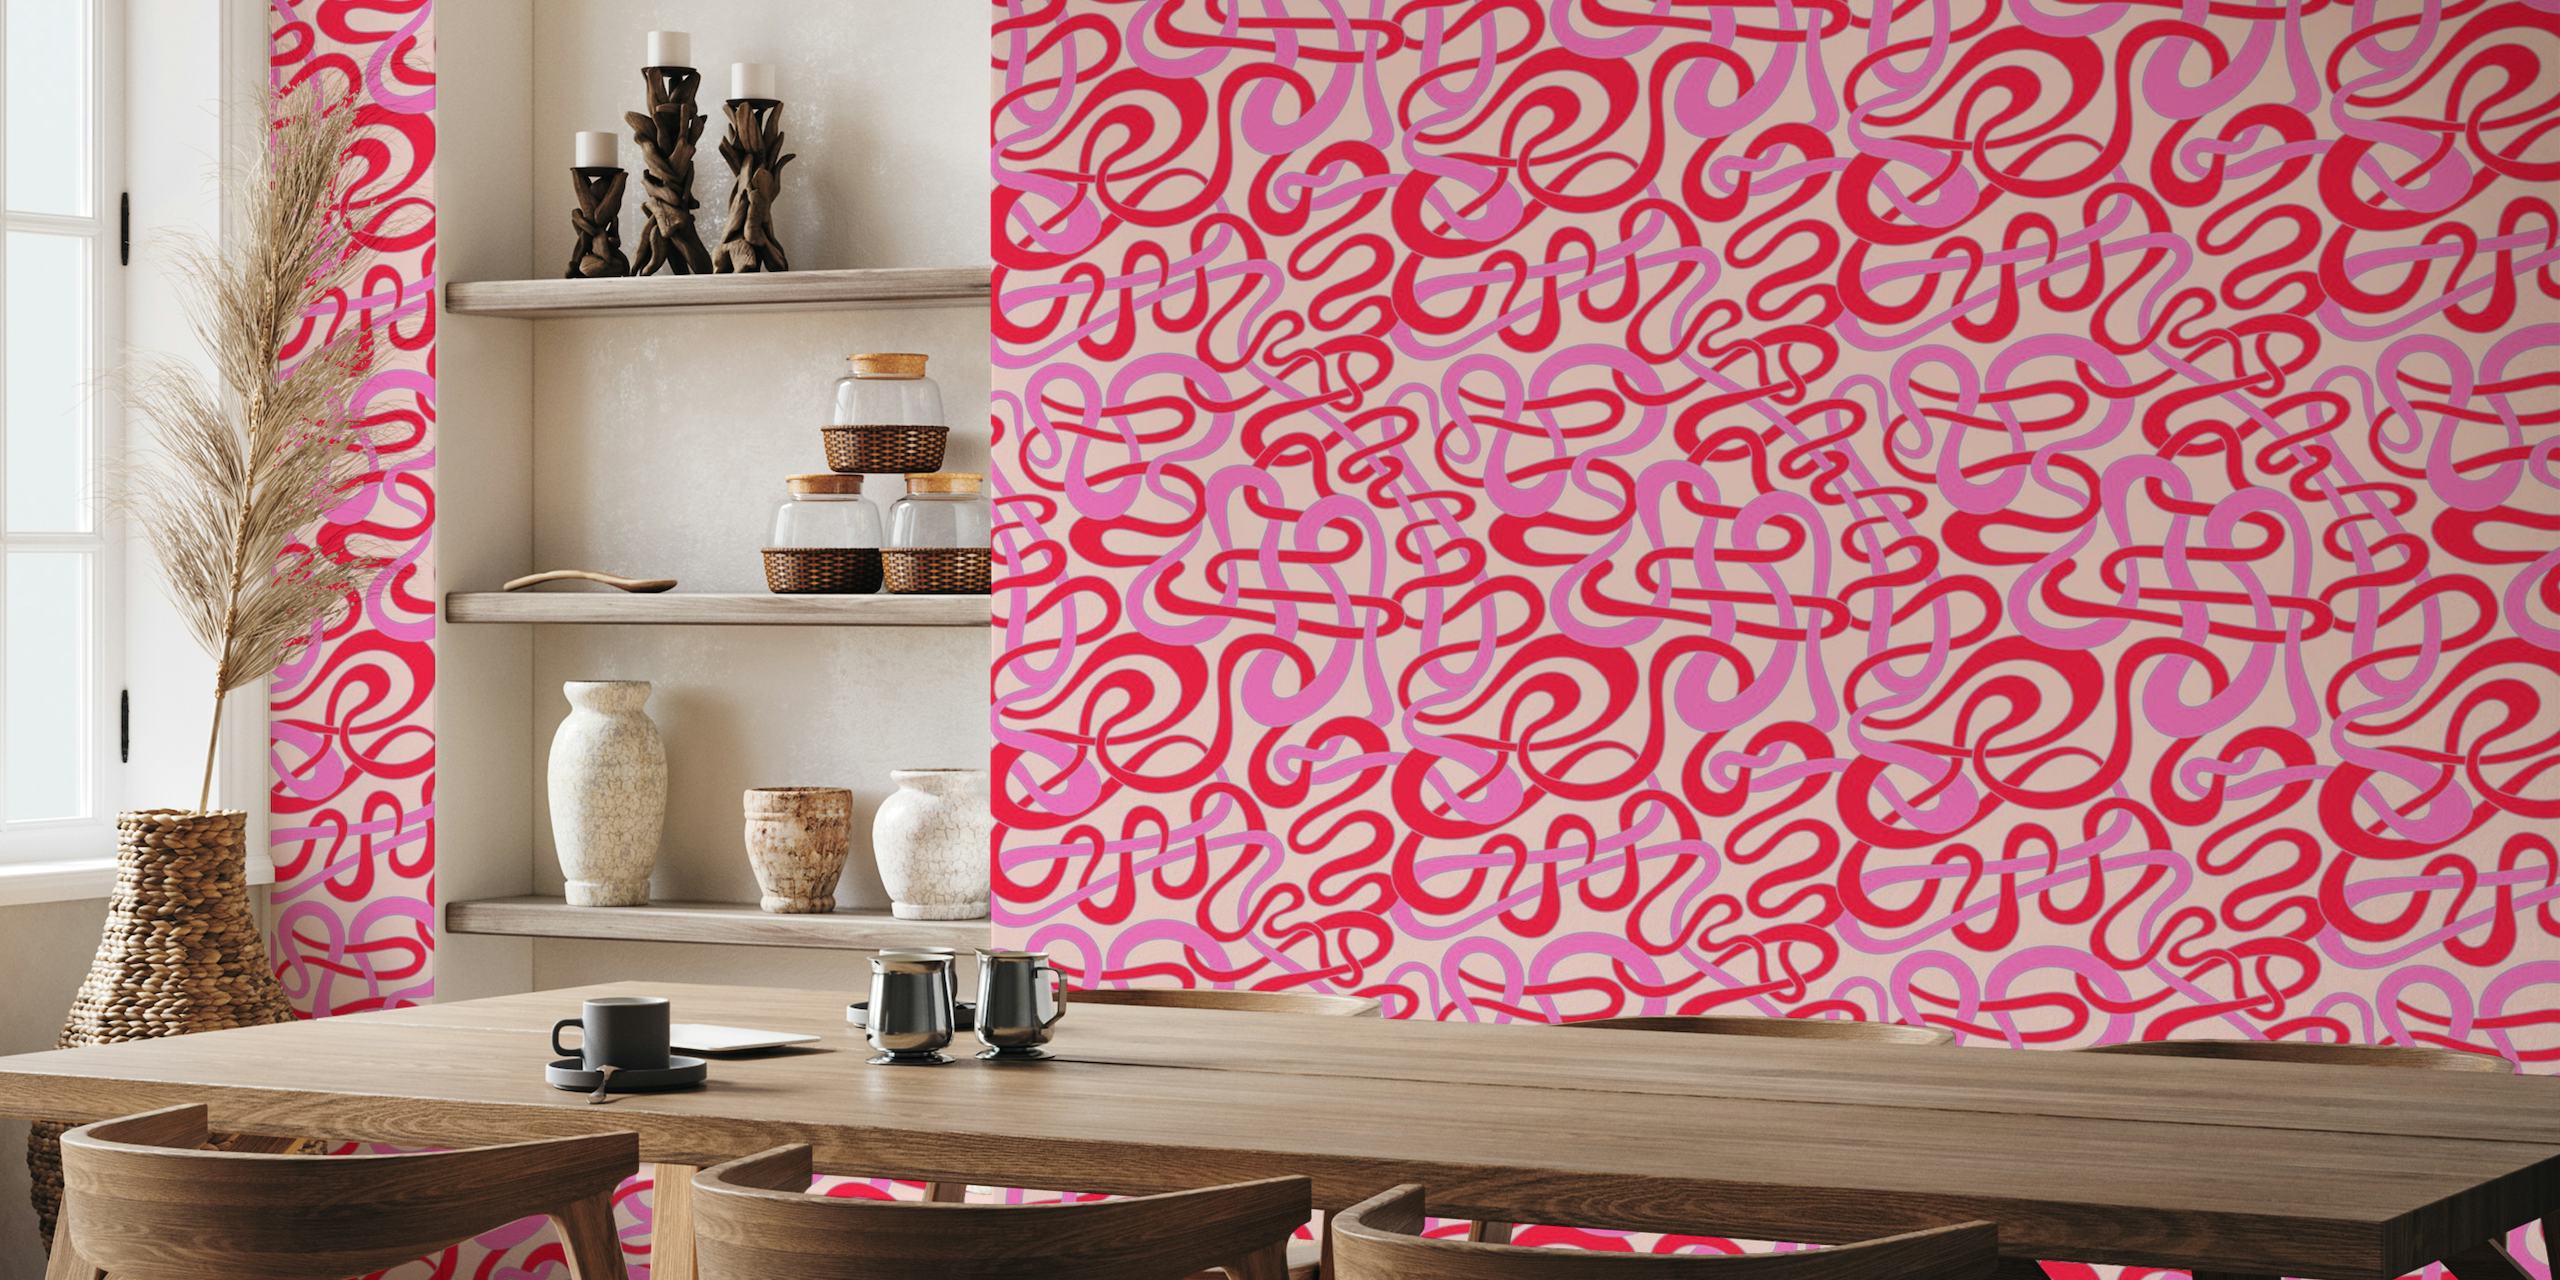 TANGLED STRIPES Abstract Hot Fuchsia Pink Red papel pintado